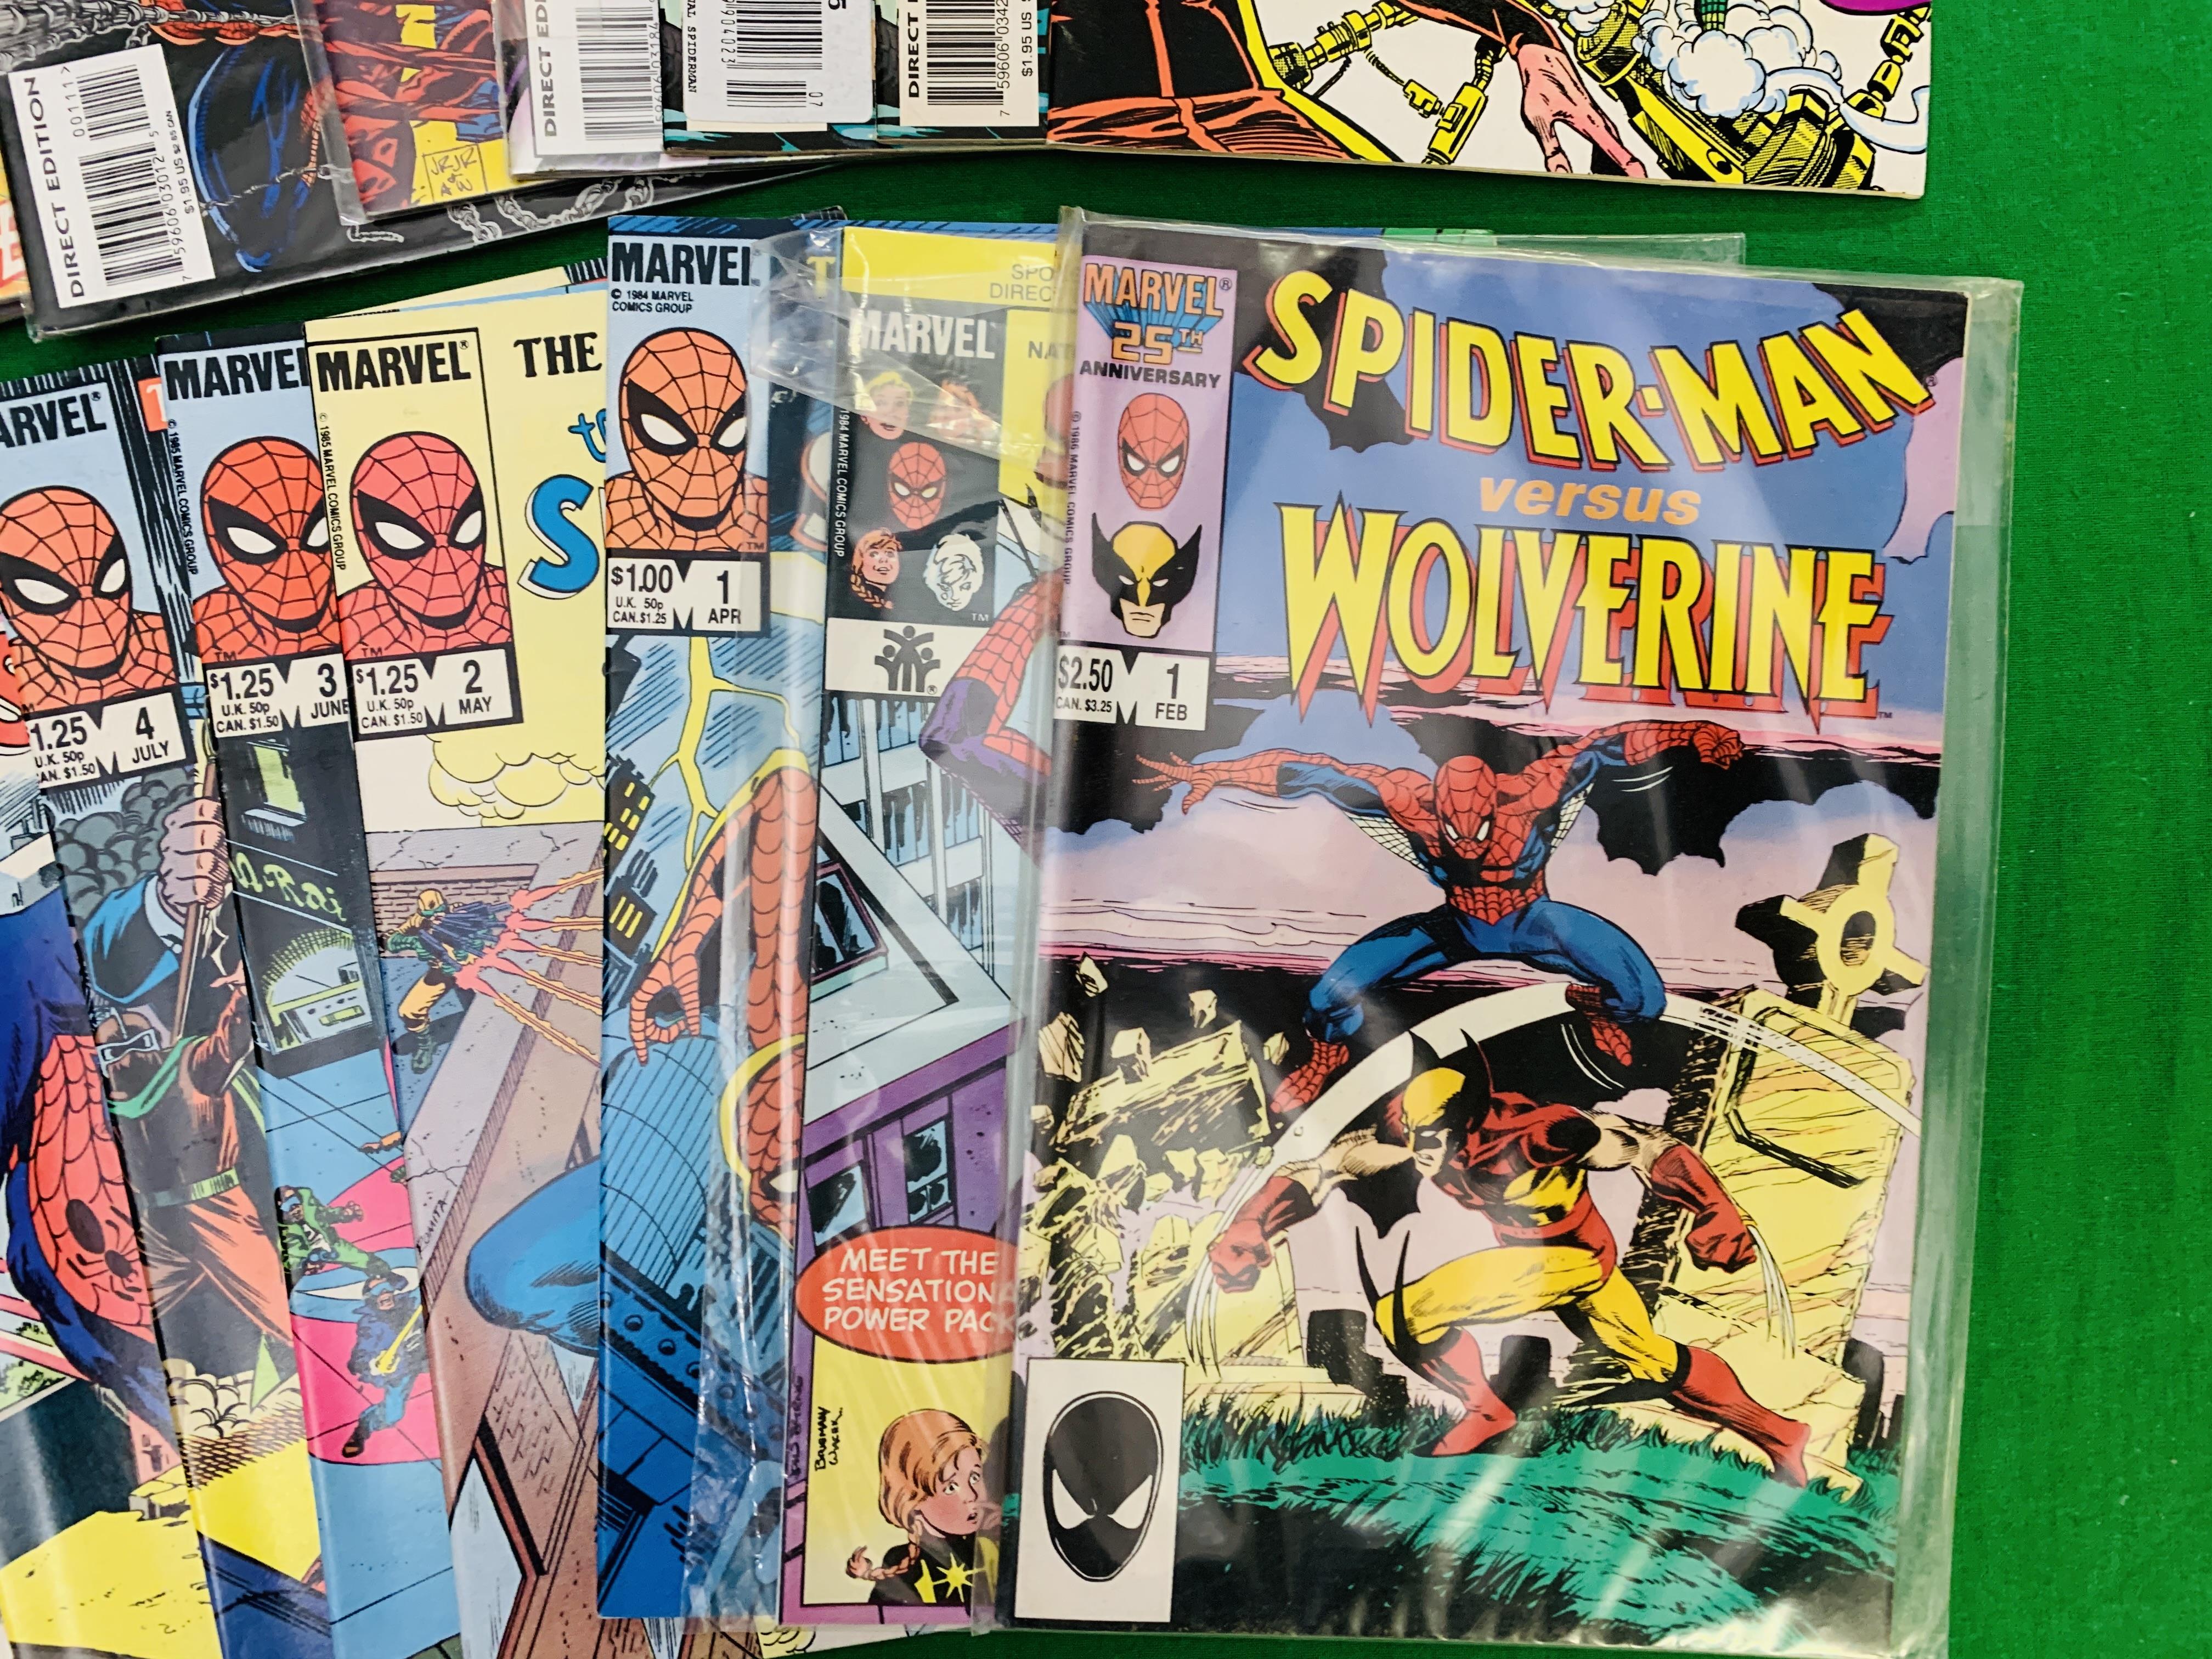 MARVEL COMICS A COLLECTION OF SPIDERMAN COMICS TO INCLUDE THE OFFICIAL MARVEL INDEX NO. - Image 2 of 5